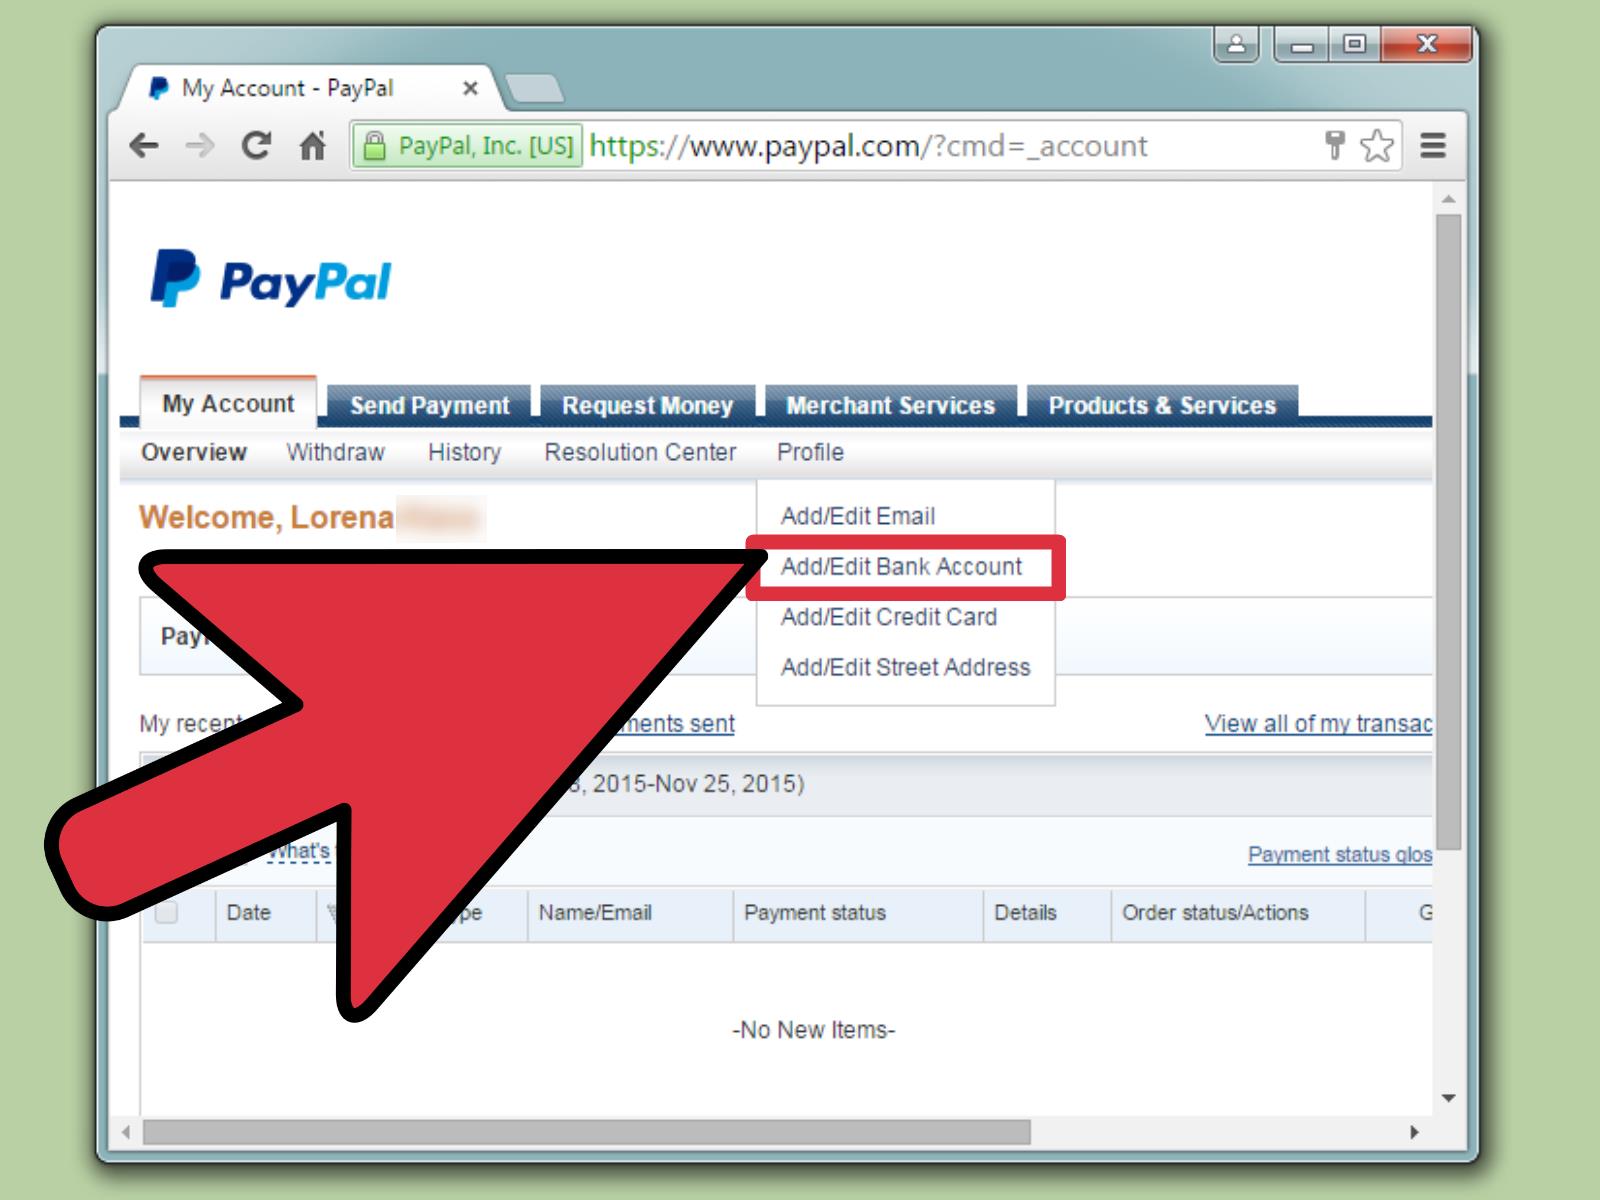 How to top up your GrabrFi account with PayPal - GrabrFi Help Center